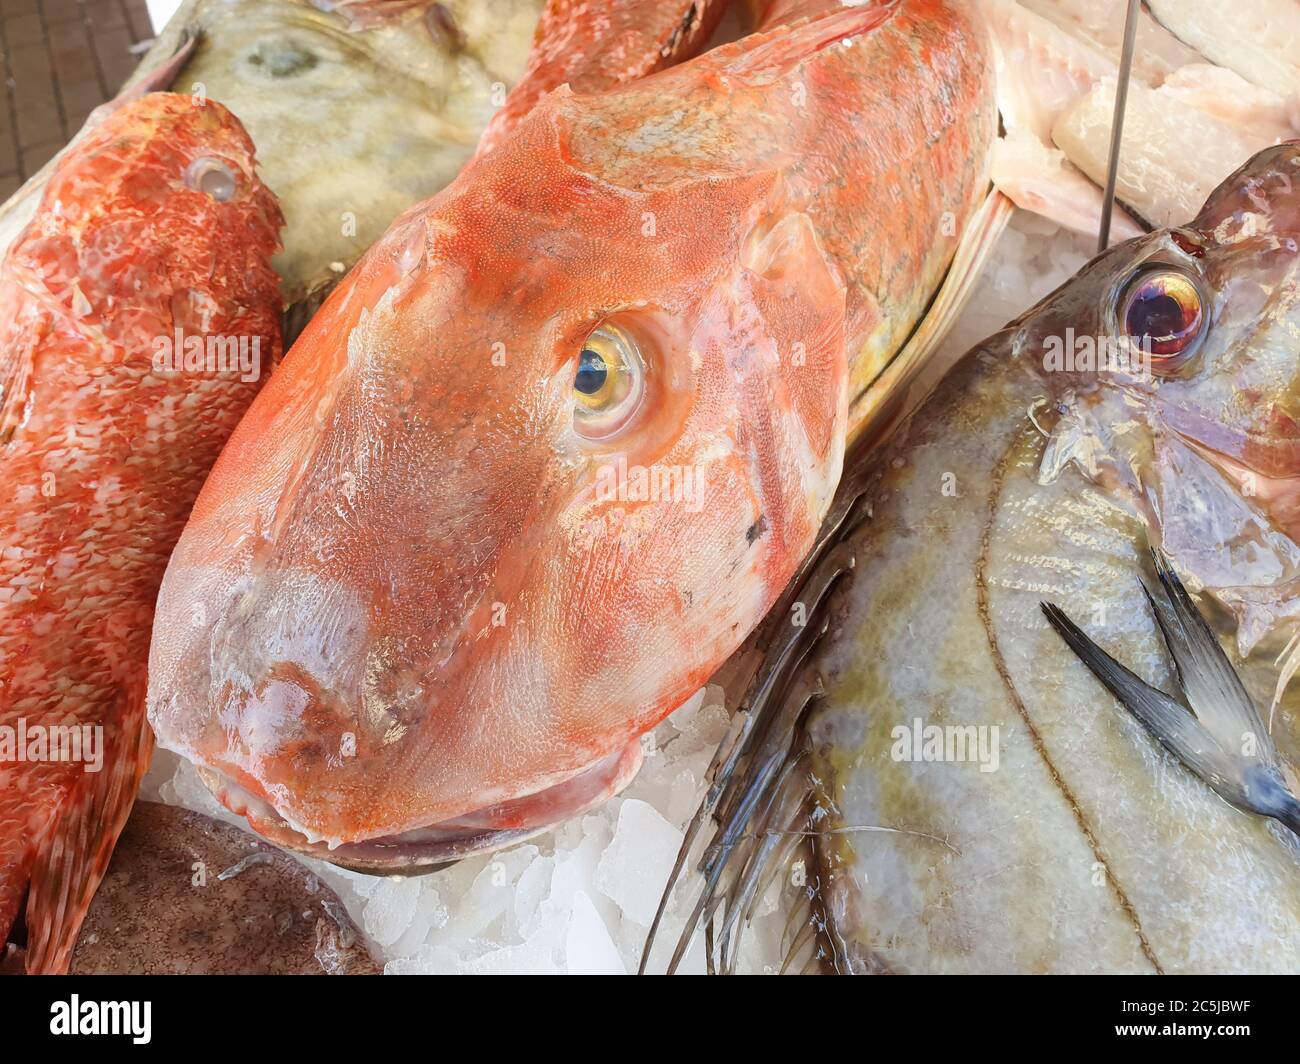 Mediterranean red tub gurnard (Chelidonichthys lucerna) sold at the market  outside Stock Photo - Alamy